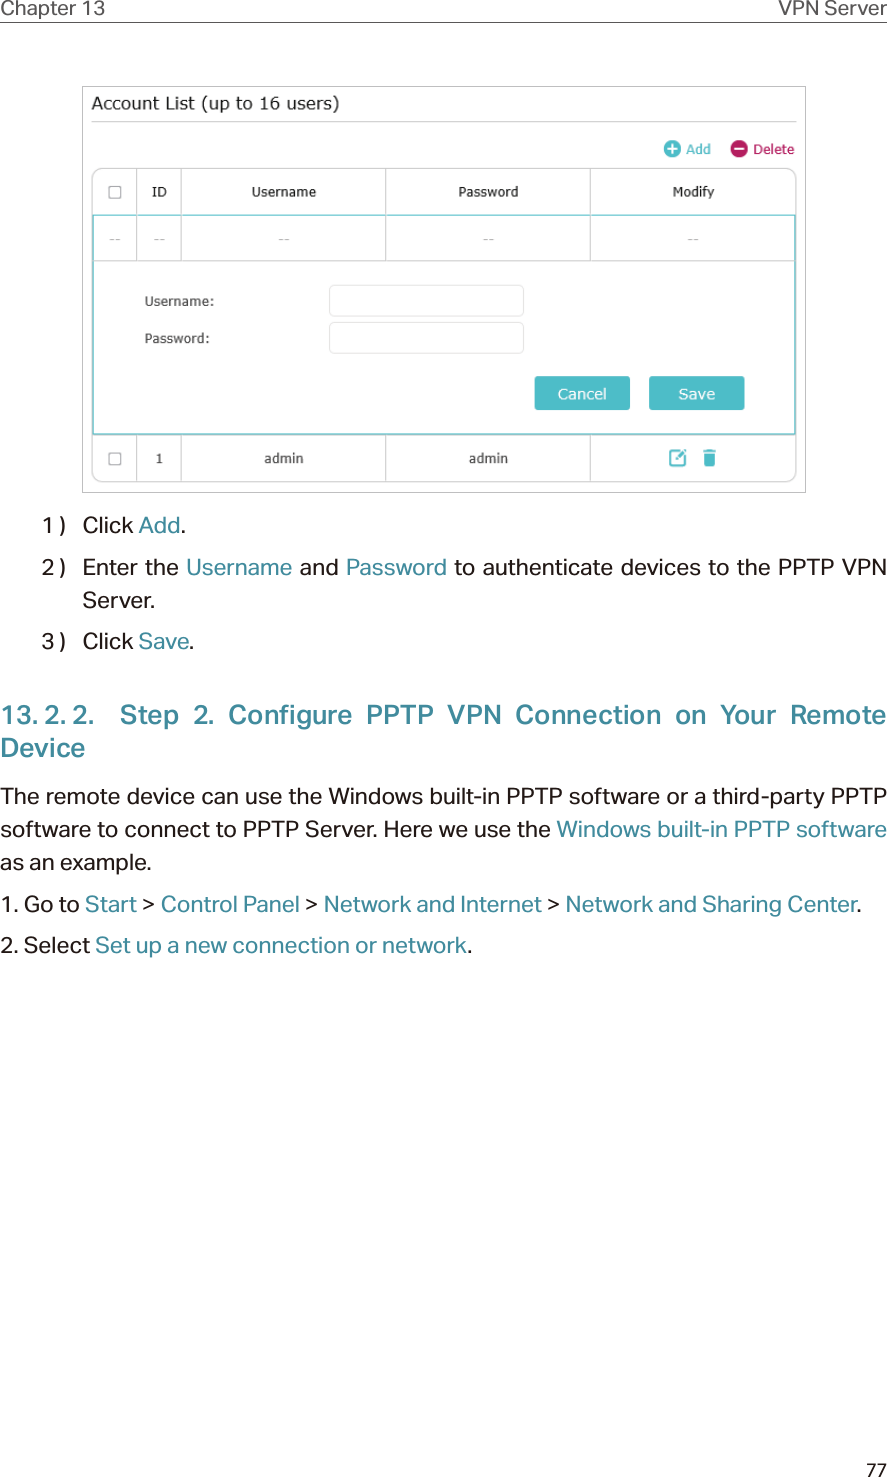 77Chapter 13 VPN Server1 )  Click Add.2 )  Enter the Username and Password to authenticate devices to the PPTP VPN Server.3 )  Click Save.13. 2. 2.  Step 2. Configure PPTP VPN Connection on Your Remote DeviceThe remote device can use the Windows built-in PPTP software or a third-party PPTP software to connect to PPTP Server. Here we use the Windows built-in PPTP software as an example.1. Go to Start &gt; Control Panel &gt; Network and Internet &gt; Network and Sharing Center.2. Select Set up a new connection or network.